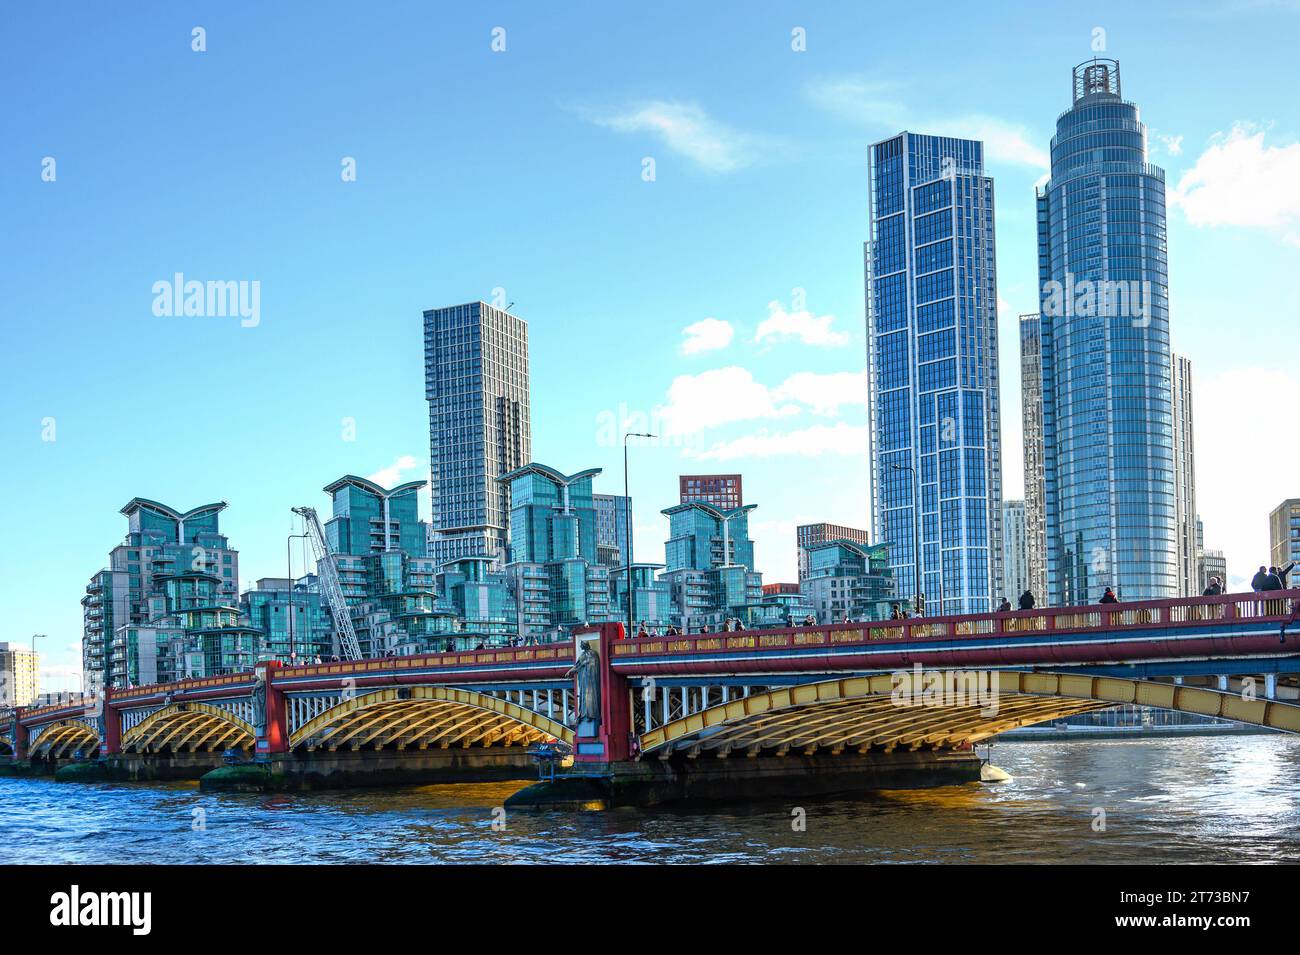 London, England, UK. Lambeth Bridge and commercial and residential development in Nine Elms / Vauxhall, seen from the north bank Stock Photo